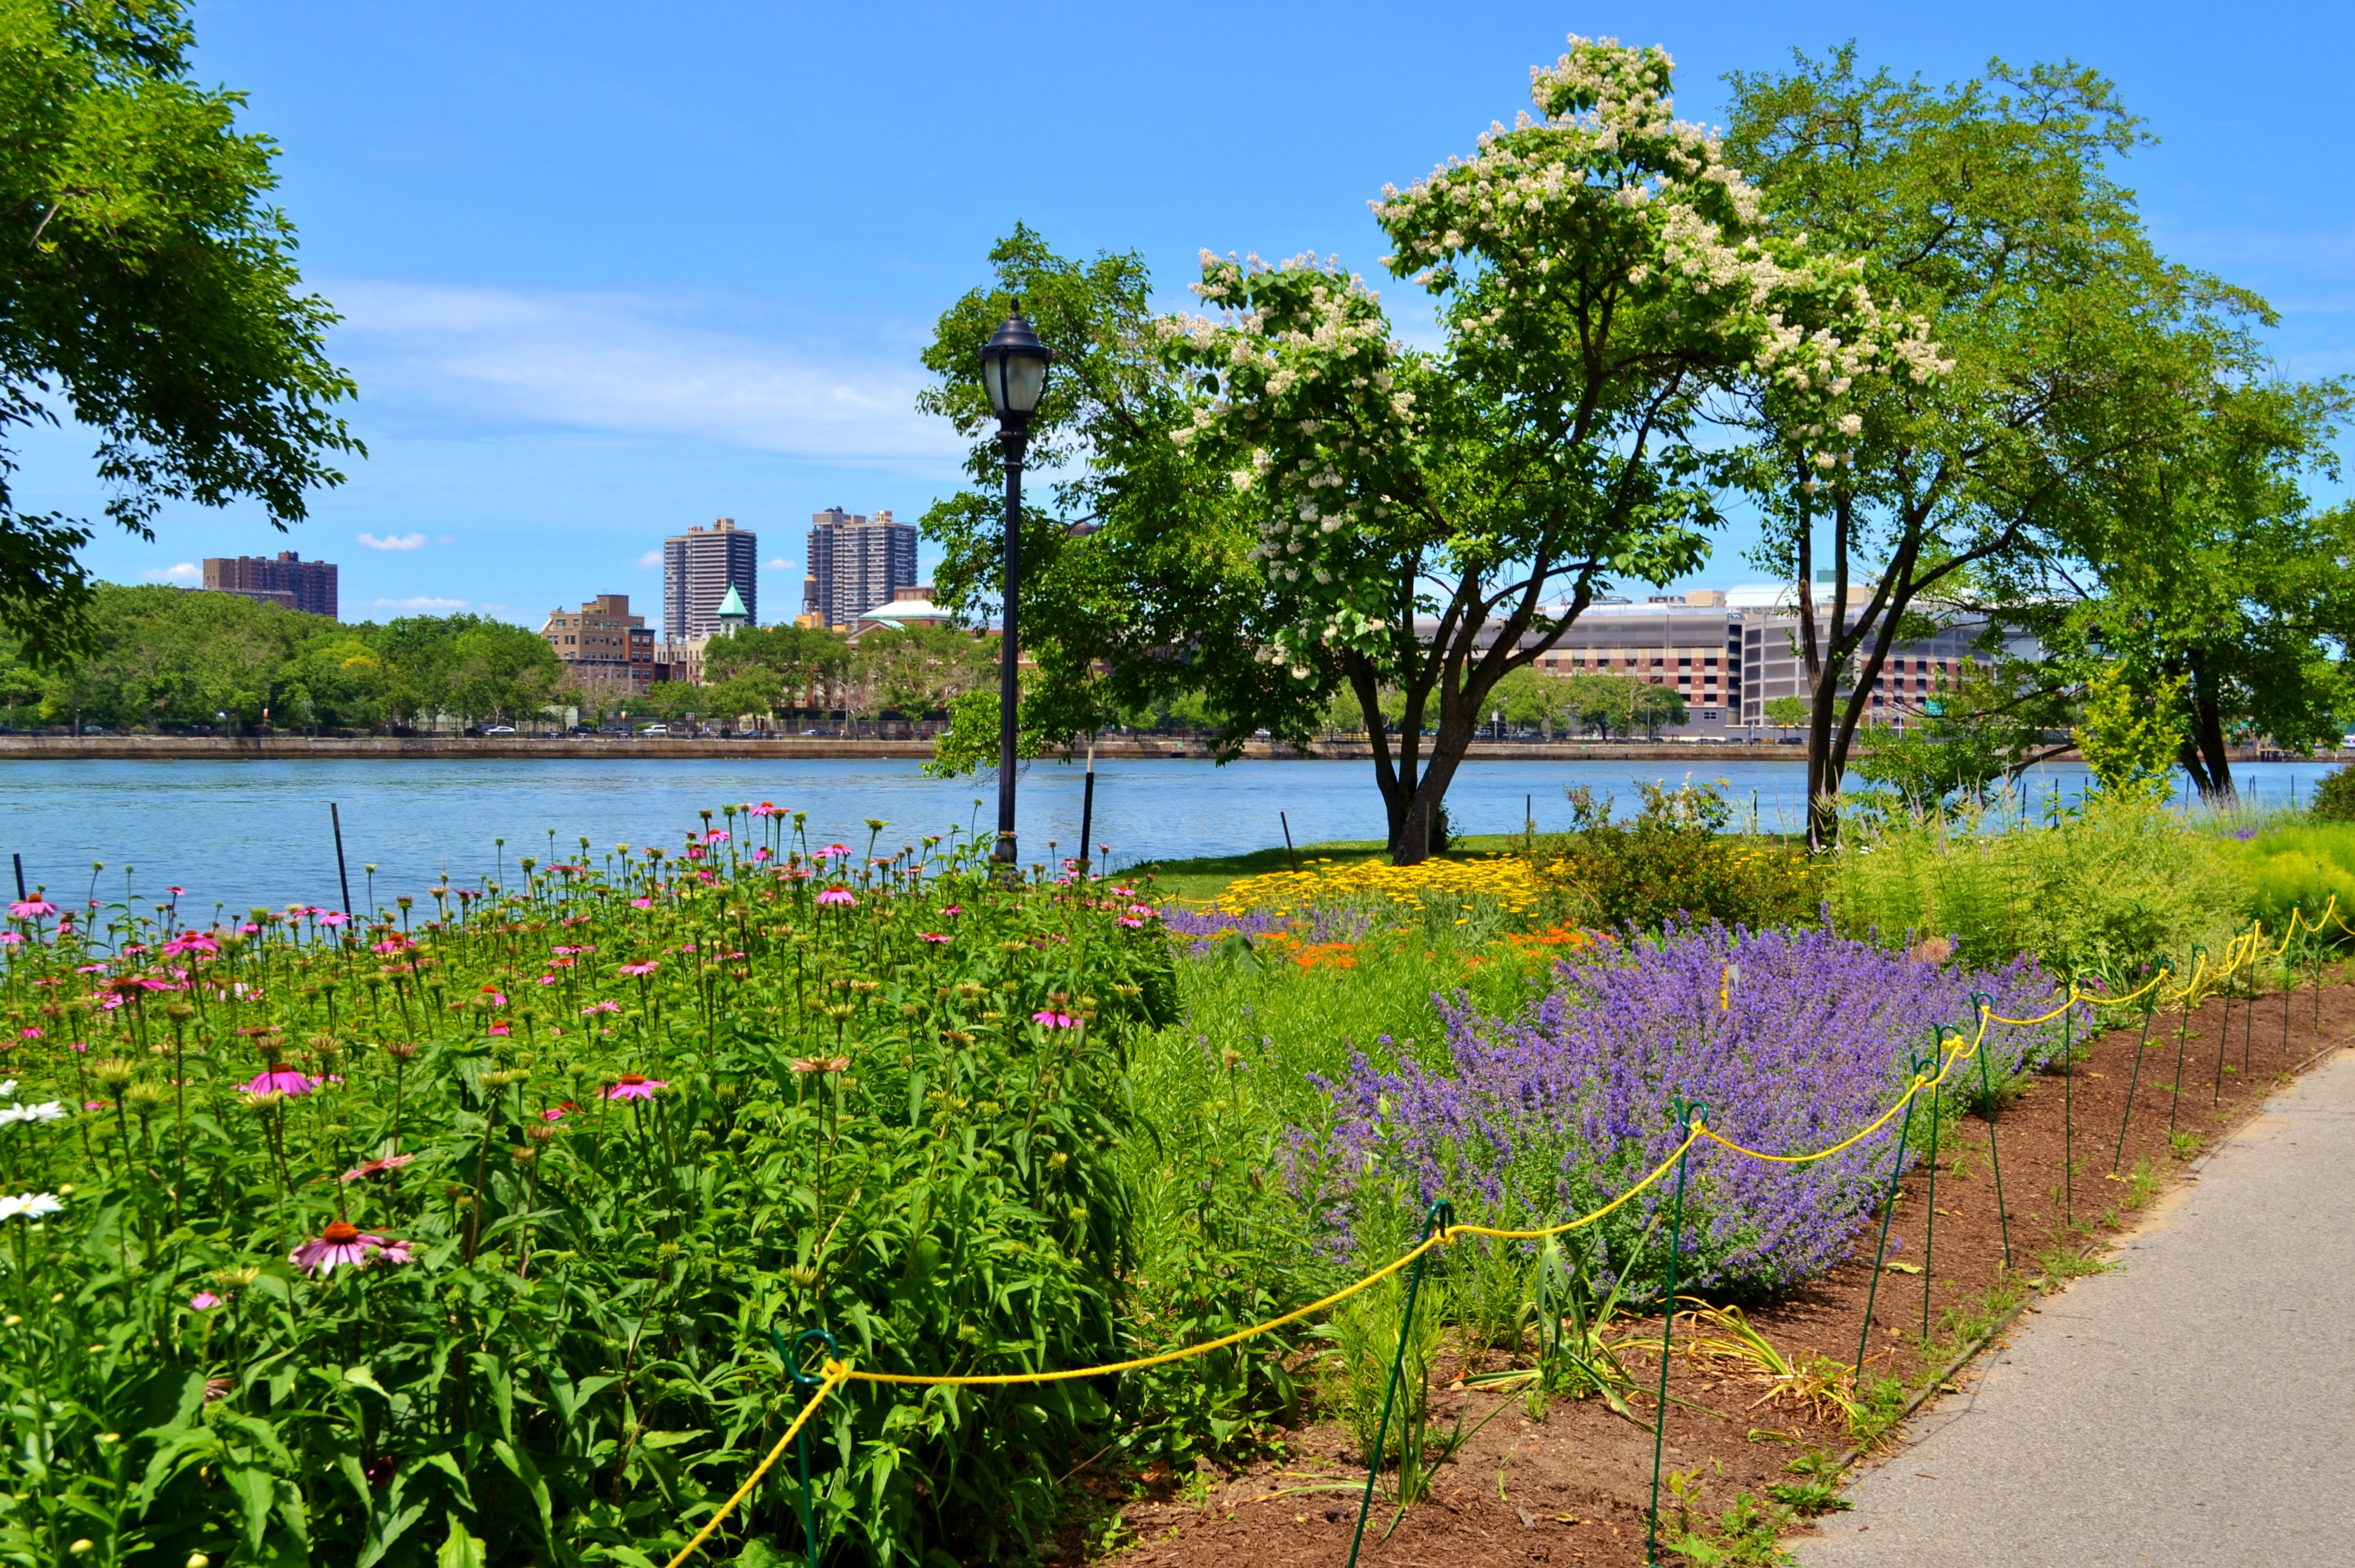 The landscaped waterside paths of Randall’s Island provide good vantage points on both the East and Harlem Rivers and the Bronx Kill. Photo: <a href="https://www.flickr.com/photos/76807015@N03/" target="_blank">Gigi Altarejos</a>